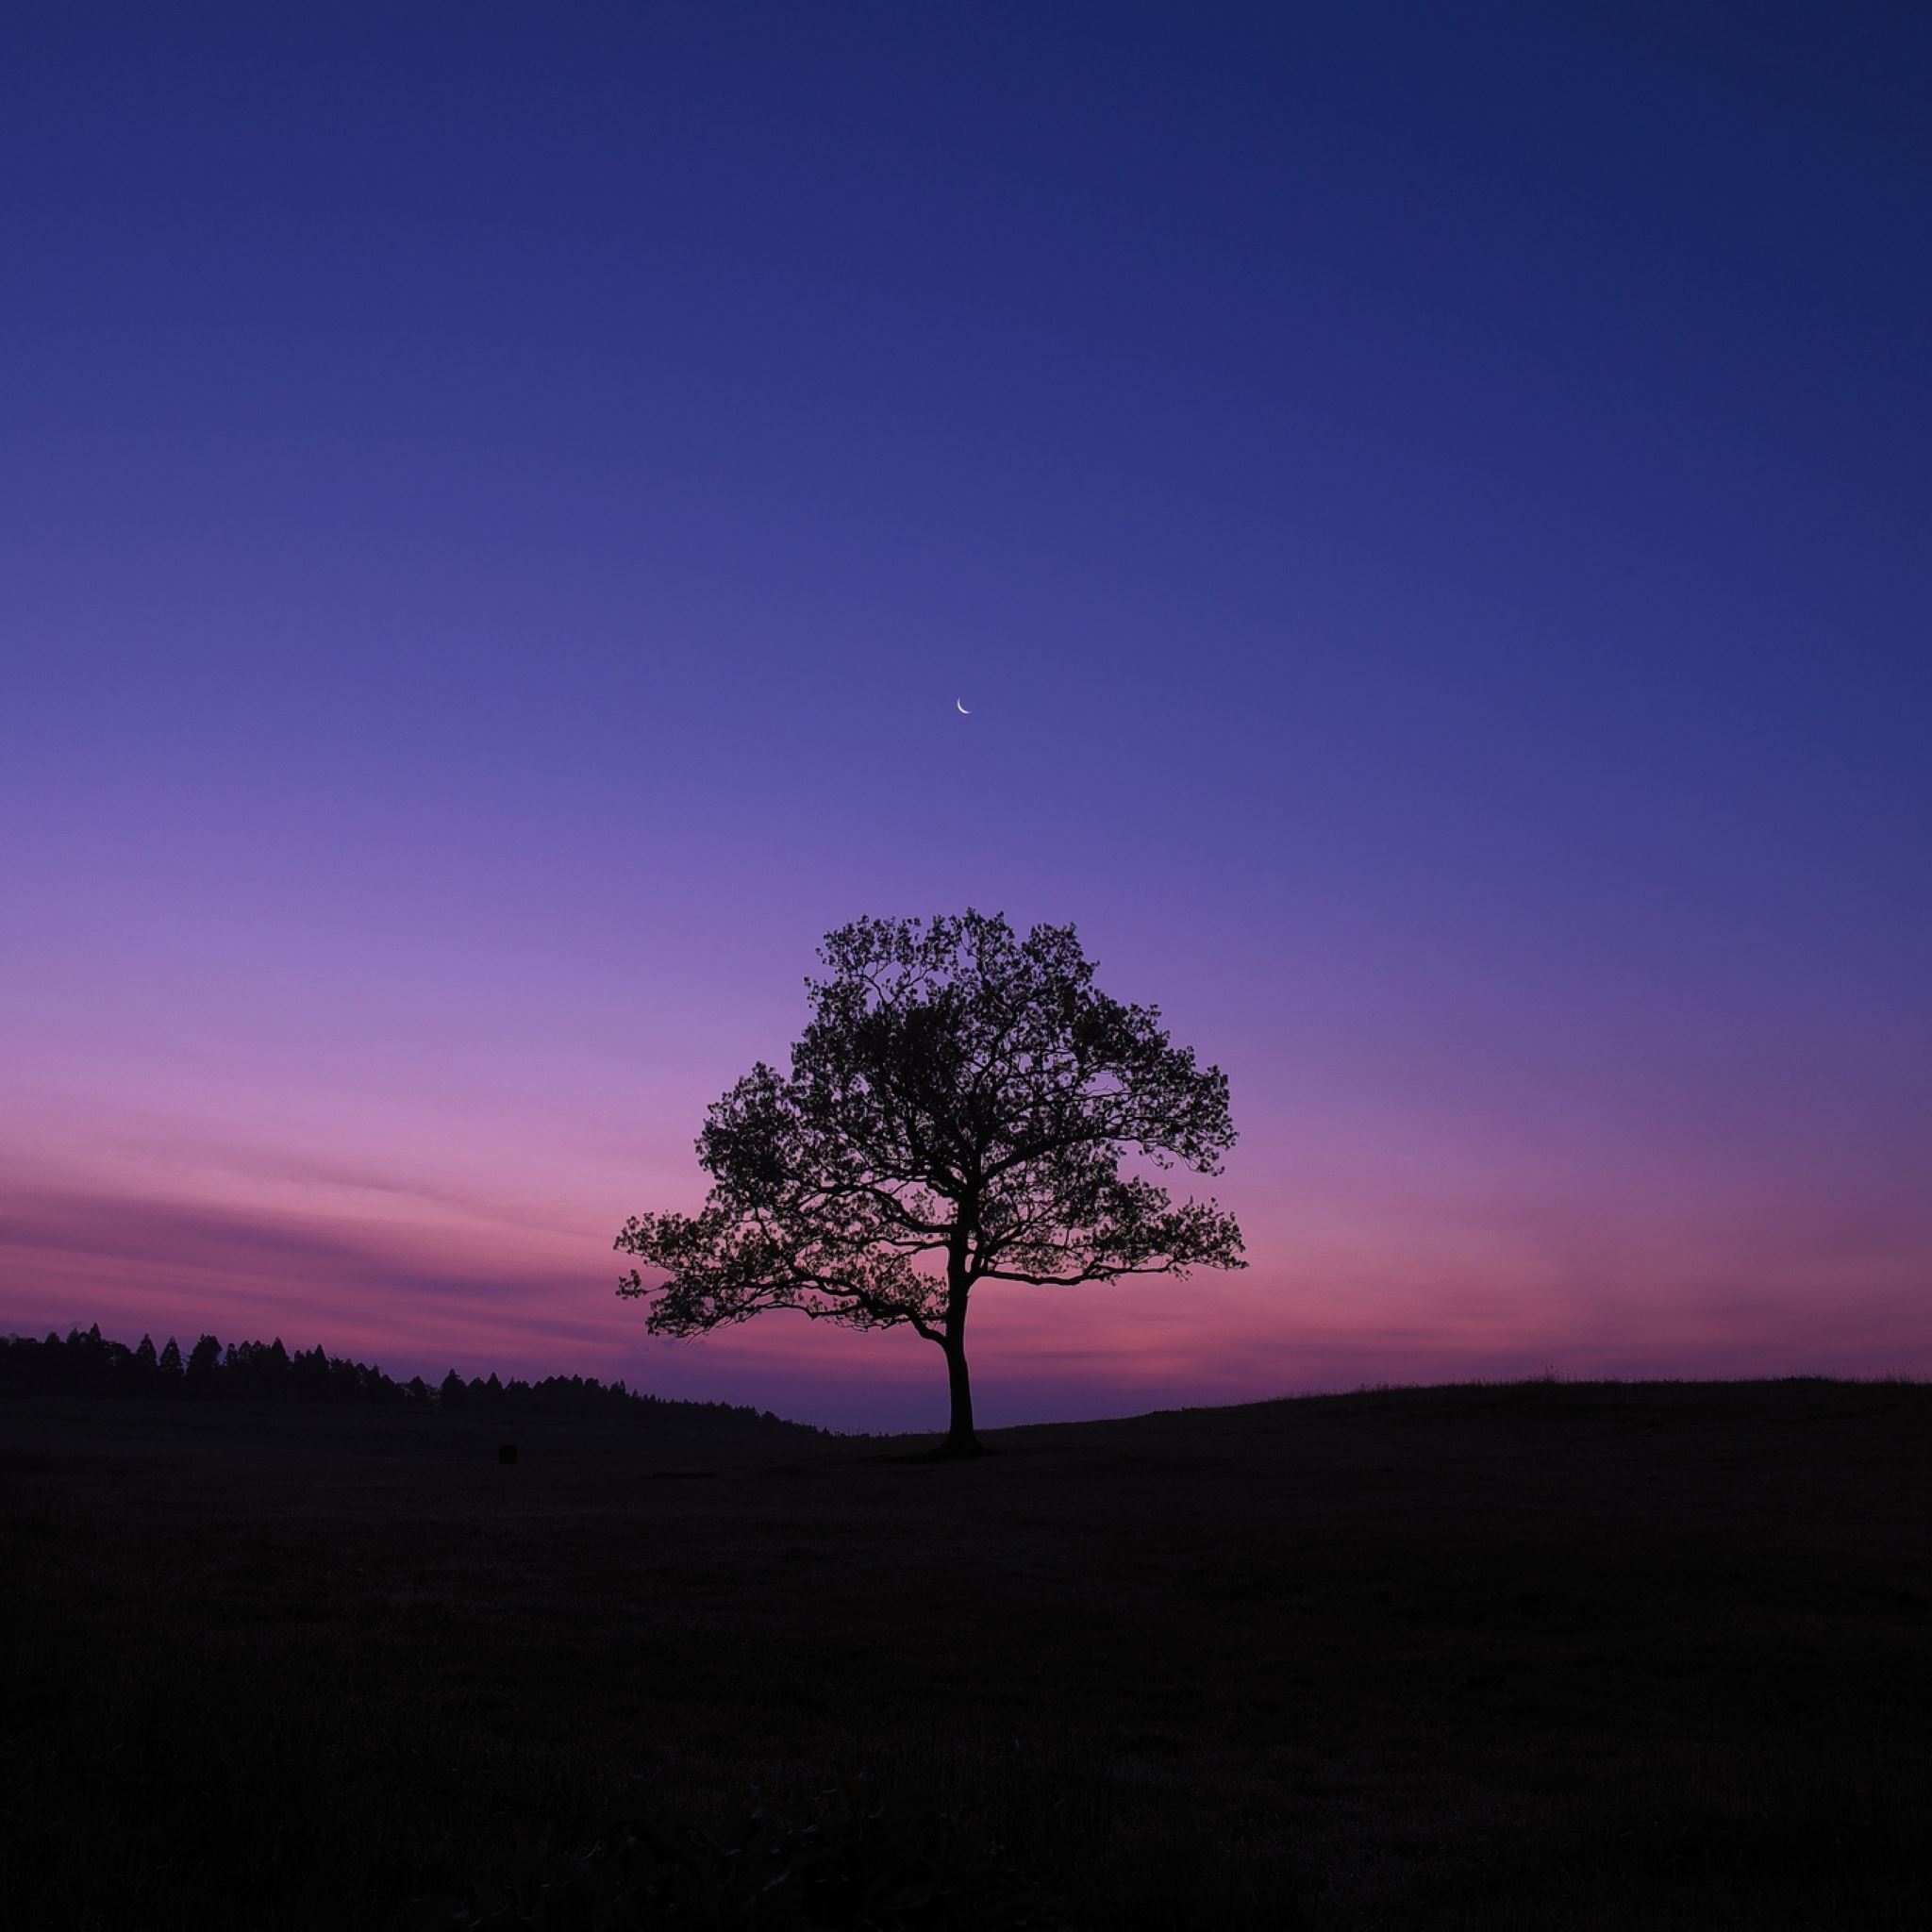 Tree night moon sky lonely iPad Air Wallpaper Free Download